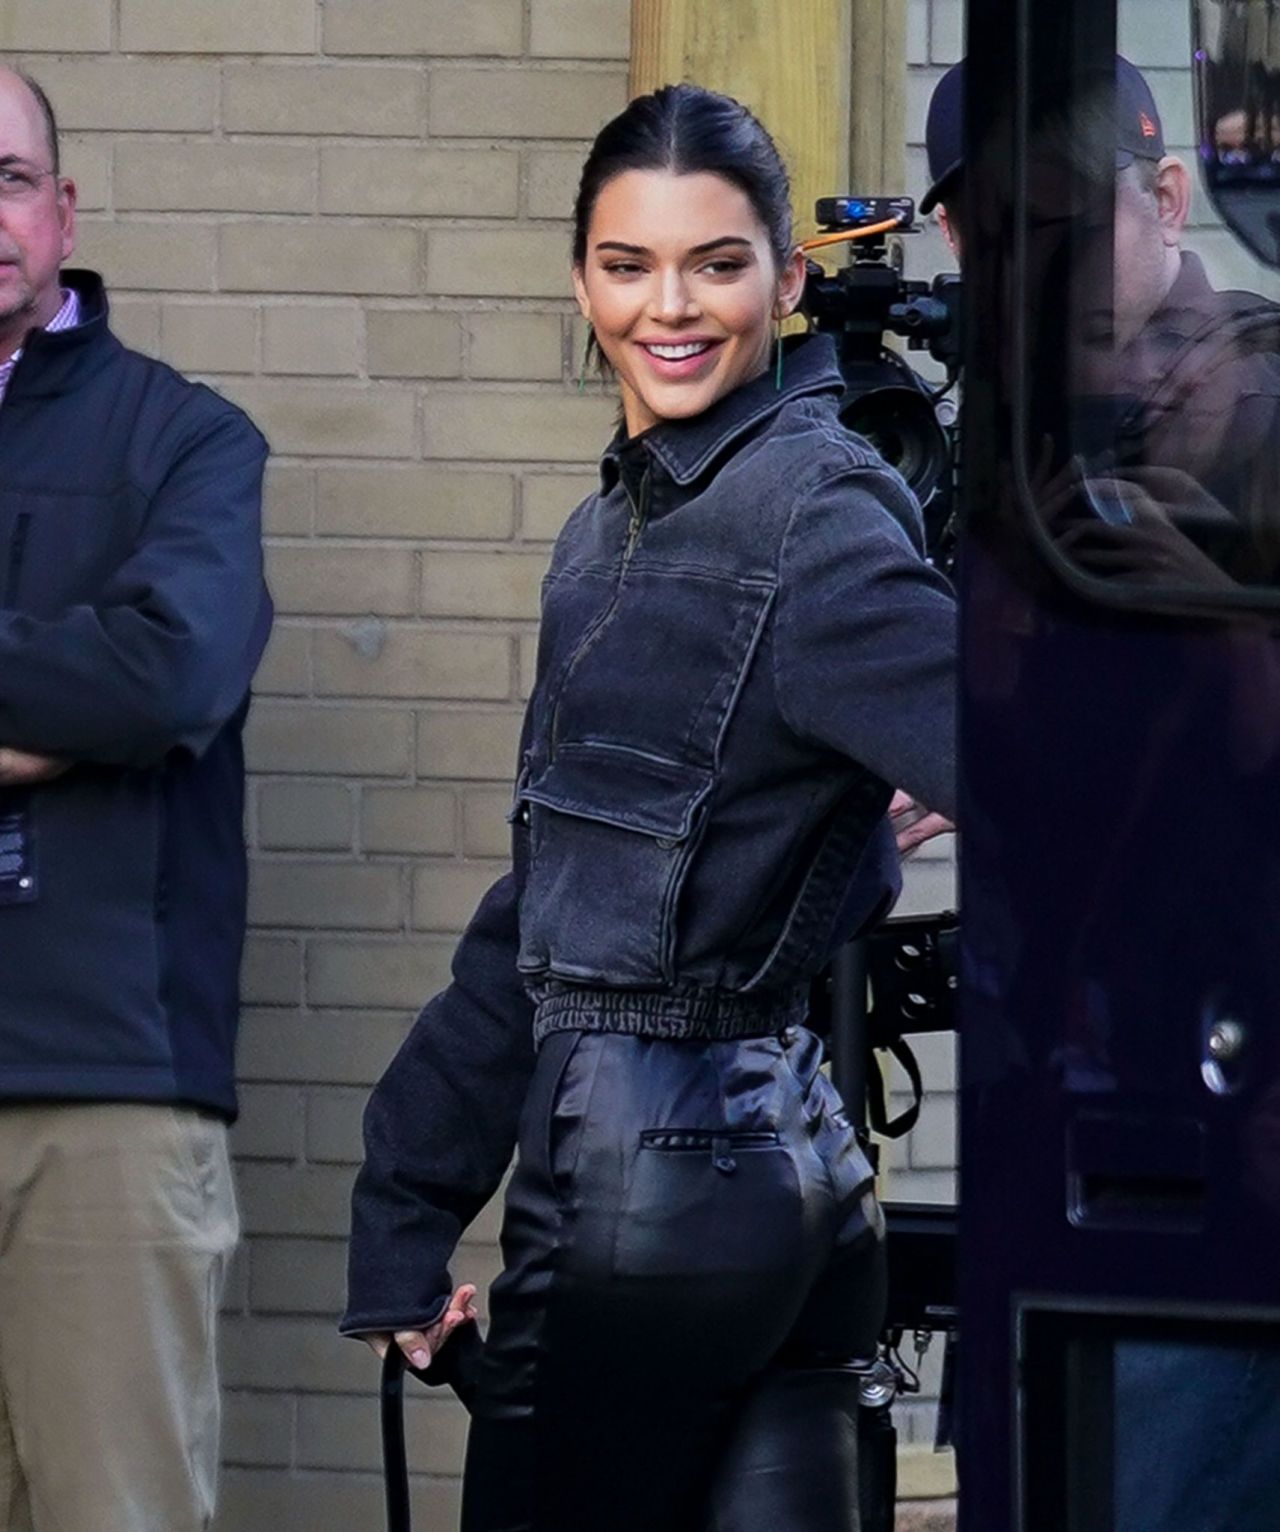 kendall-jenner-arriving-for-victoria-s-secret-fashion-show-rehearsals-in-nyc-11-07-2018-6.jpg